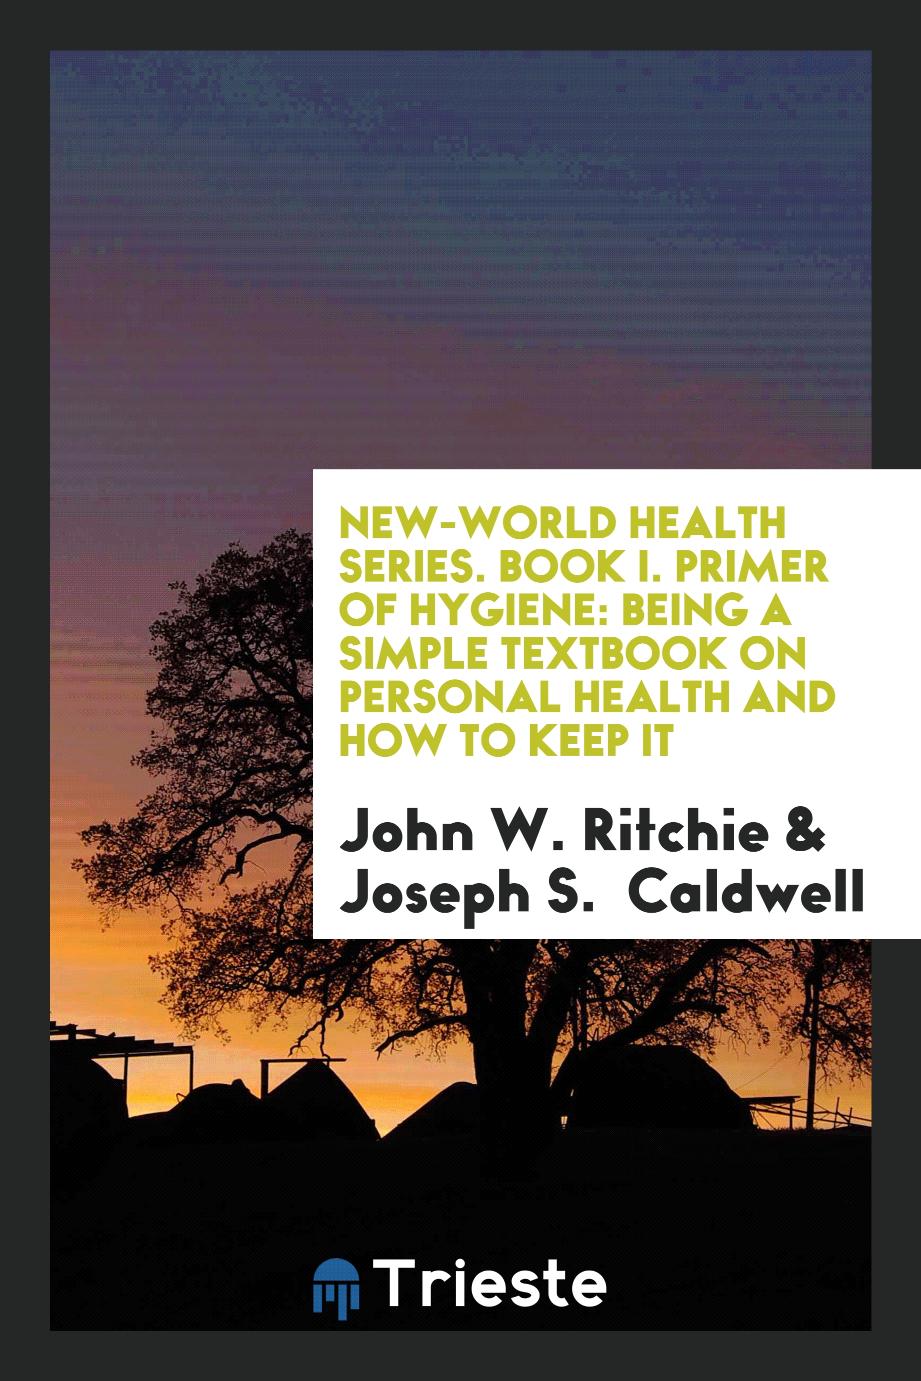 New-World Health Series. Book I. Primer of Hygiene: Being a Simple Textbook on Personal Health and how to Keep It